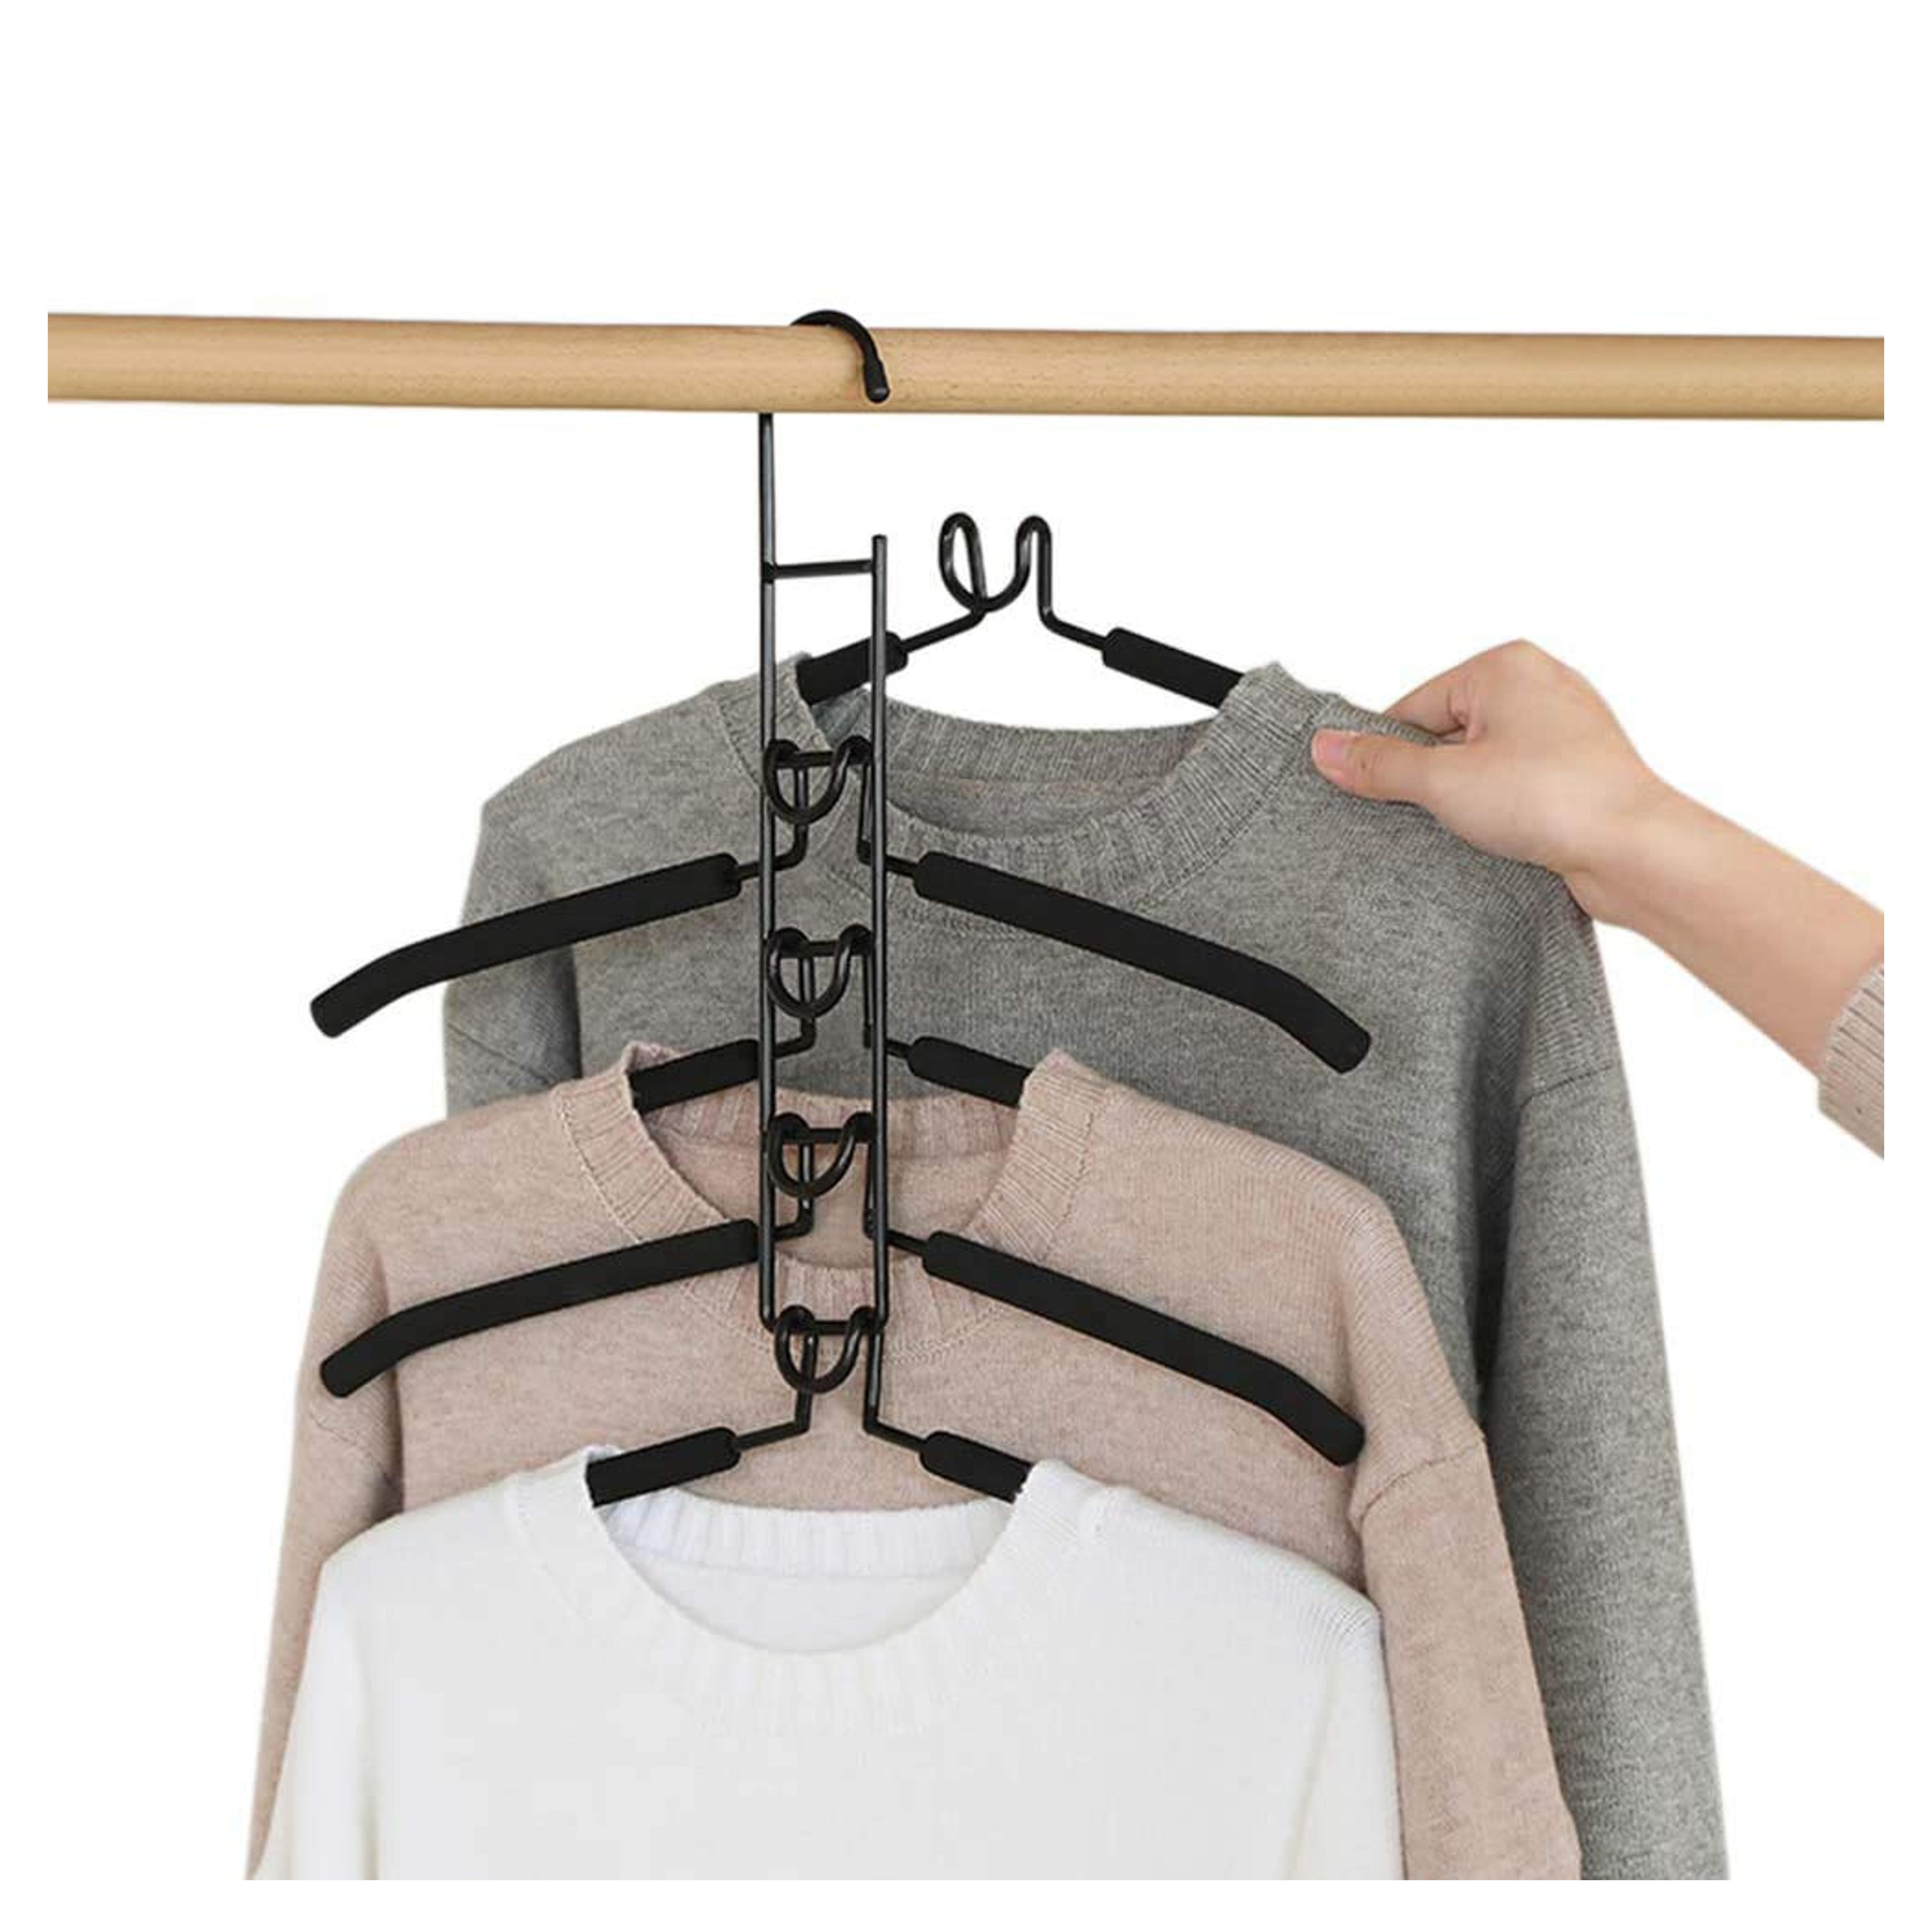 Amazon.com: Hangers Space Saving, 5 in 1 Non-Slip Metal Magic Clothes Hanger Wide Shoulder Multifunctional Adult Clothes Rack for Household Space Saver, Coat Suit Jacket Sweater Skirt Shirt Pants (5 in 1) : Home & Kitchen